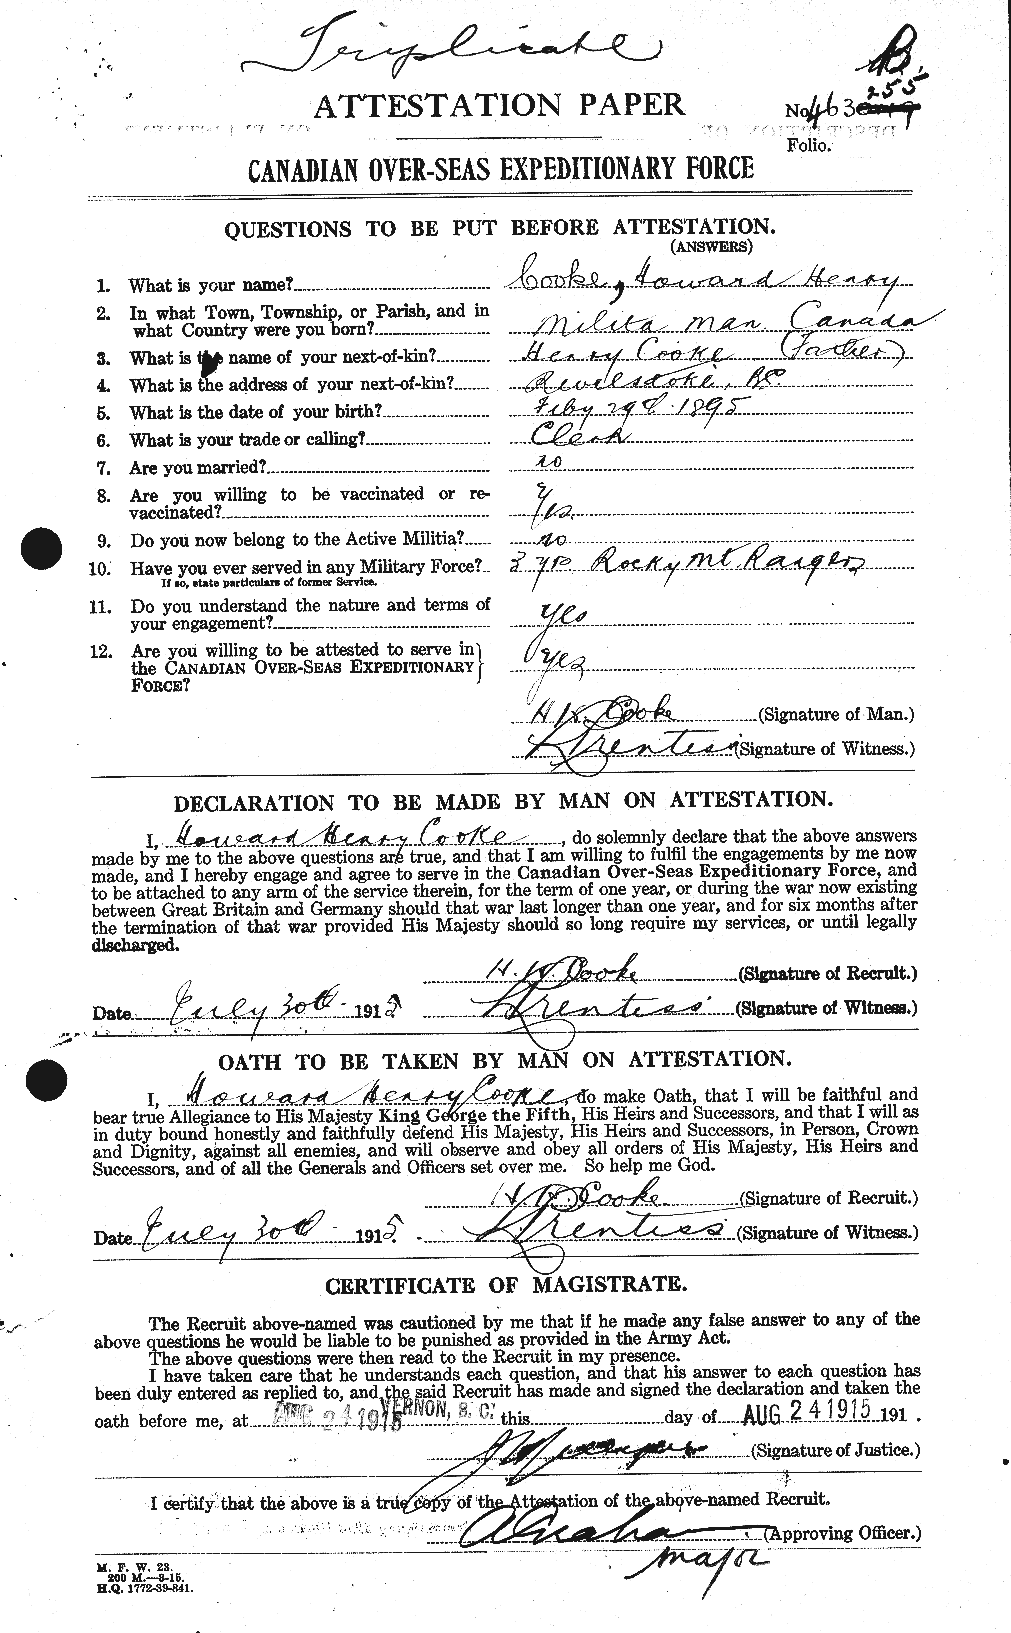 Personnel Records of the First World War - CEF 075966a